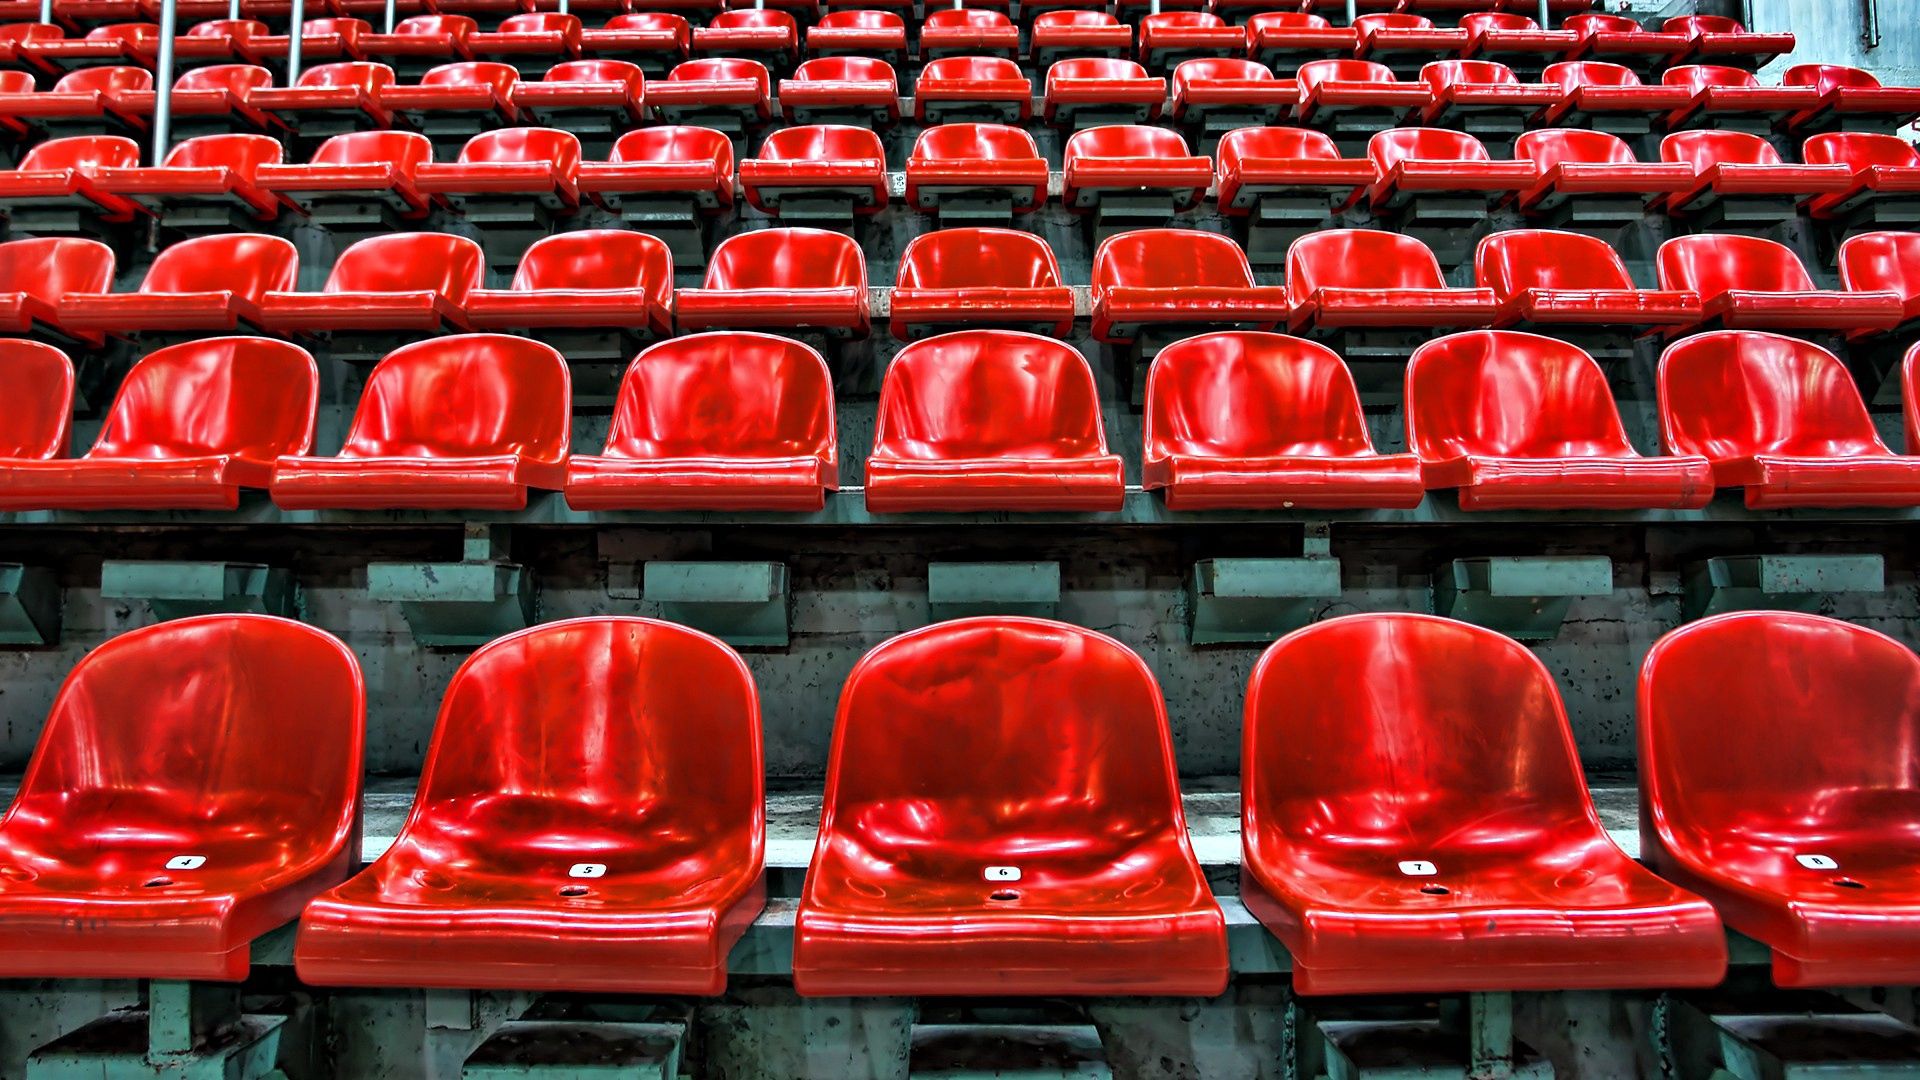 seat, red, miscellanea, miscellaneous, seats, stadium, viewers, audience